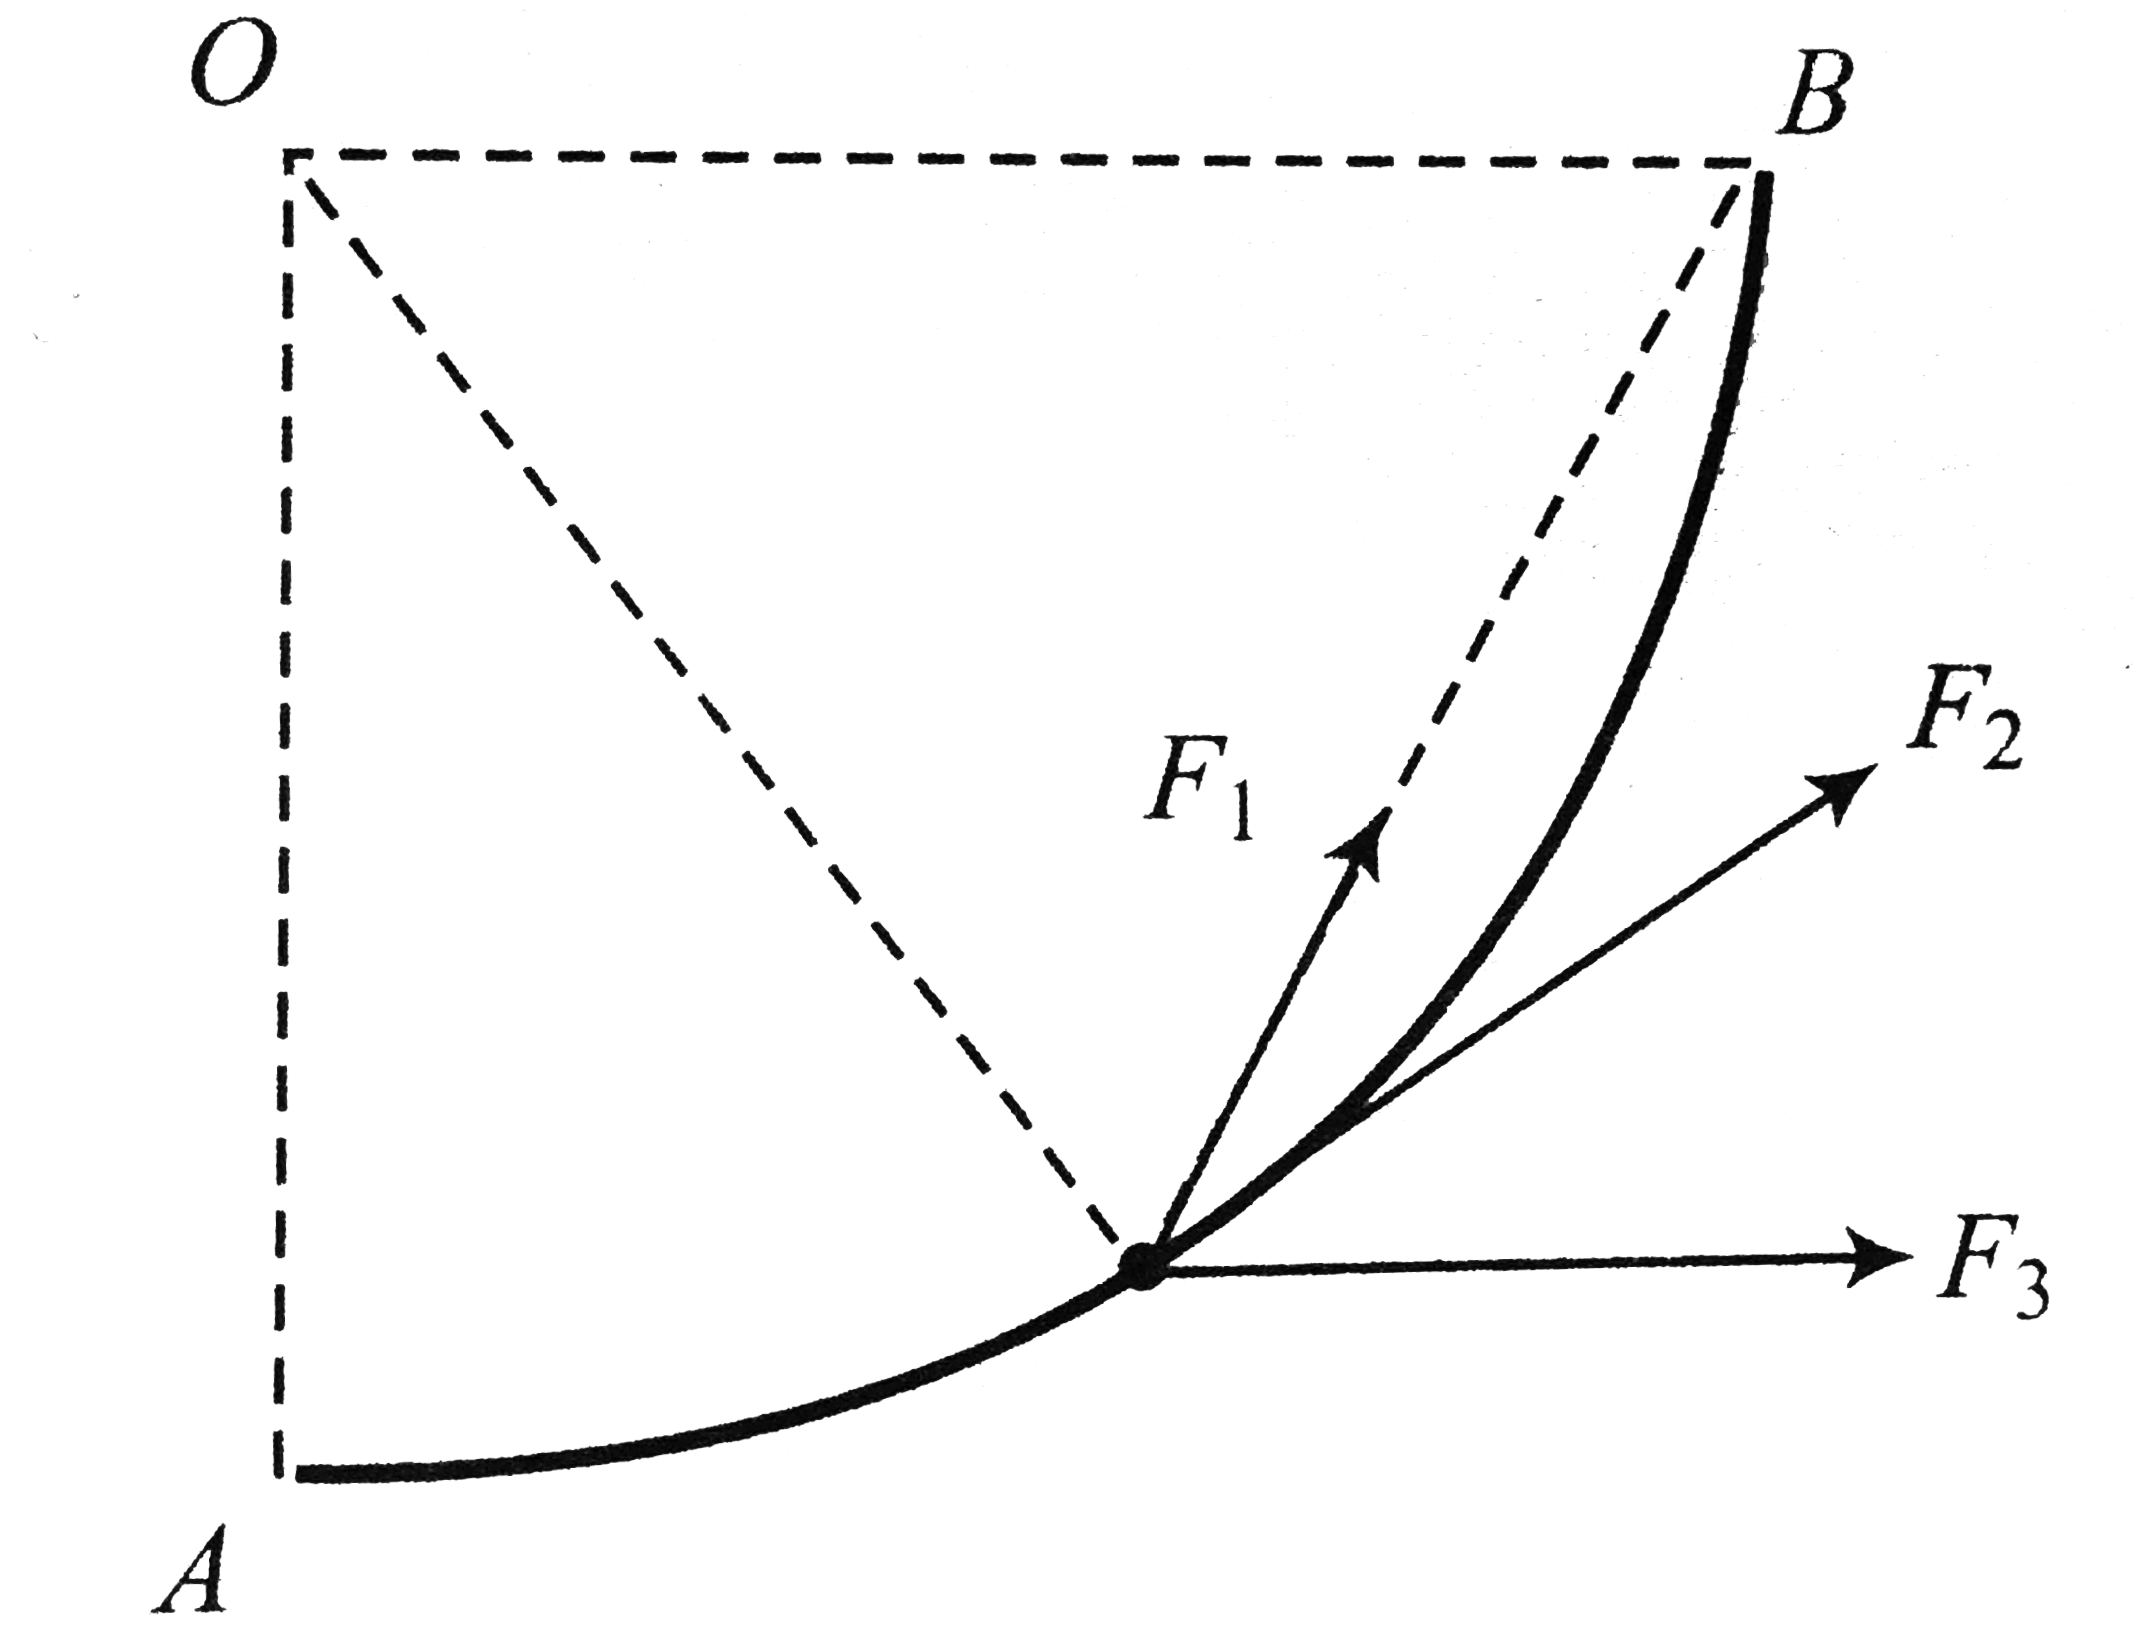 AB is a quarter of smooth circular track of radius R=6m. A particle P of mass 0.5kg moves along the track from A to B under the action of the following forces.      a. A force F1 directed always towards the point B, its magnitude is constant and is equal to 20N.   b. A force F2 directed along the instantaneous tangent to the circular track, its magnitude is (15-10S)N, where S is the distance travelled in metre.   c. A horizontal force of magnitude 30N.   Find the work done by forces mentioned in (a), (b) and (c)